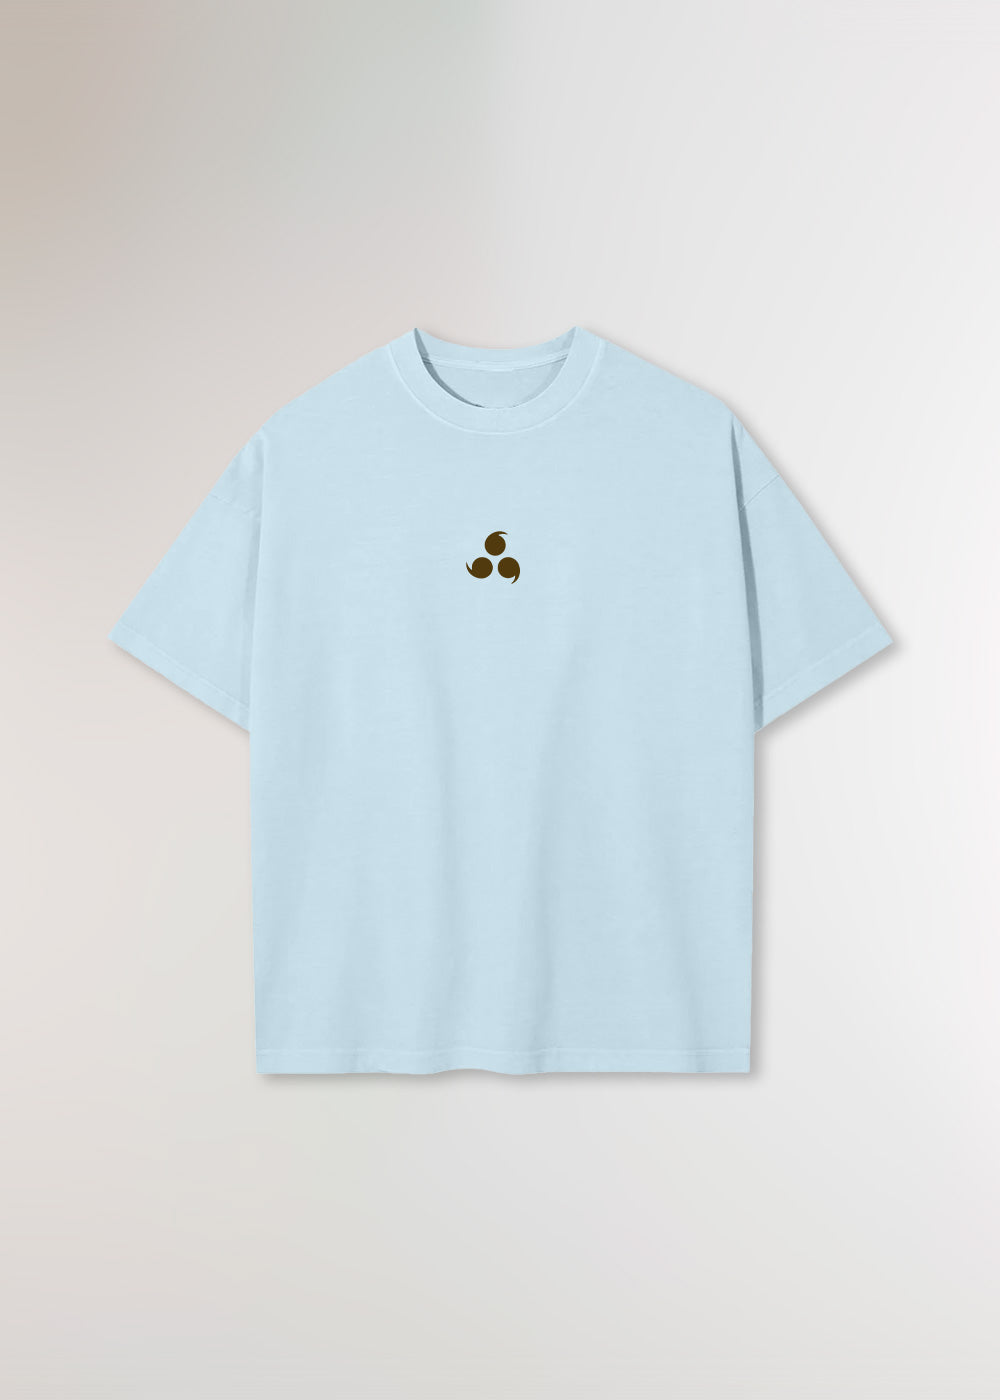 MADE IN JAPAN - CURSED® LIGHT BLUE T-SHIRT